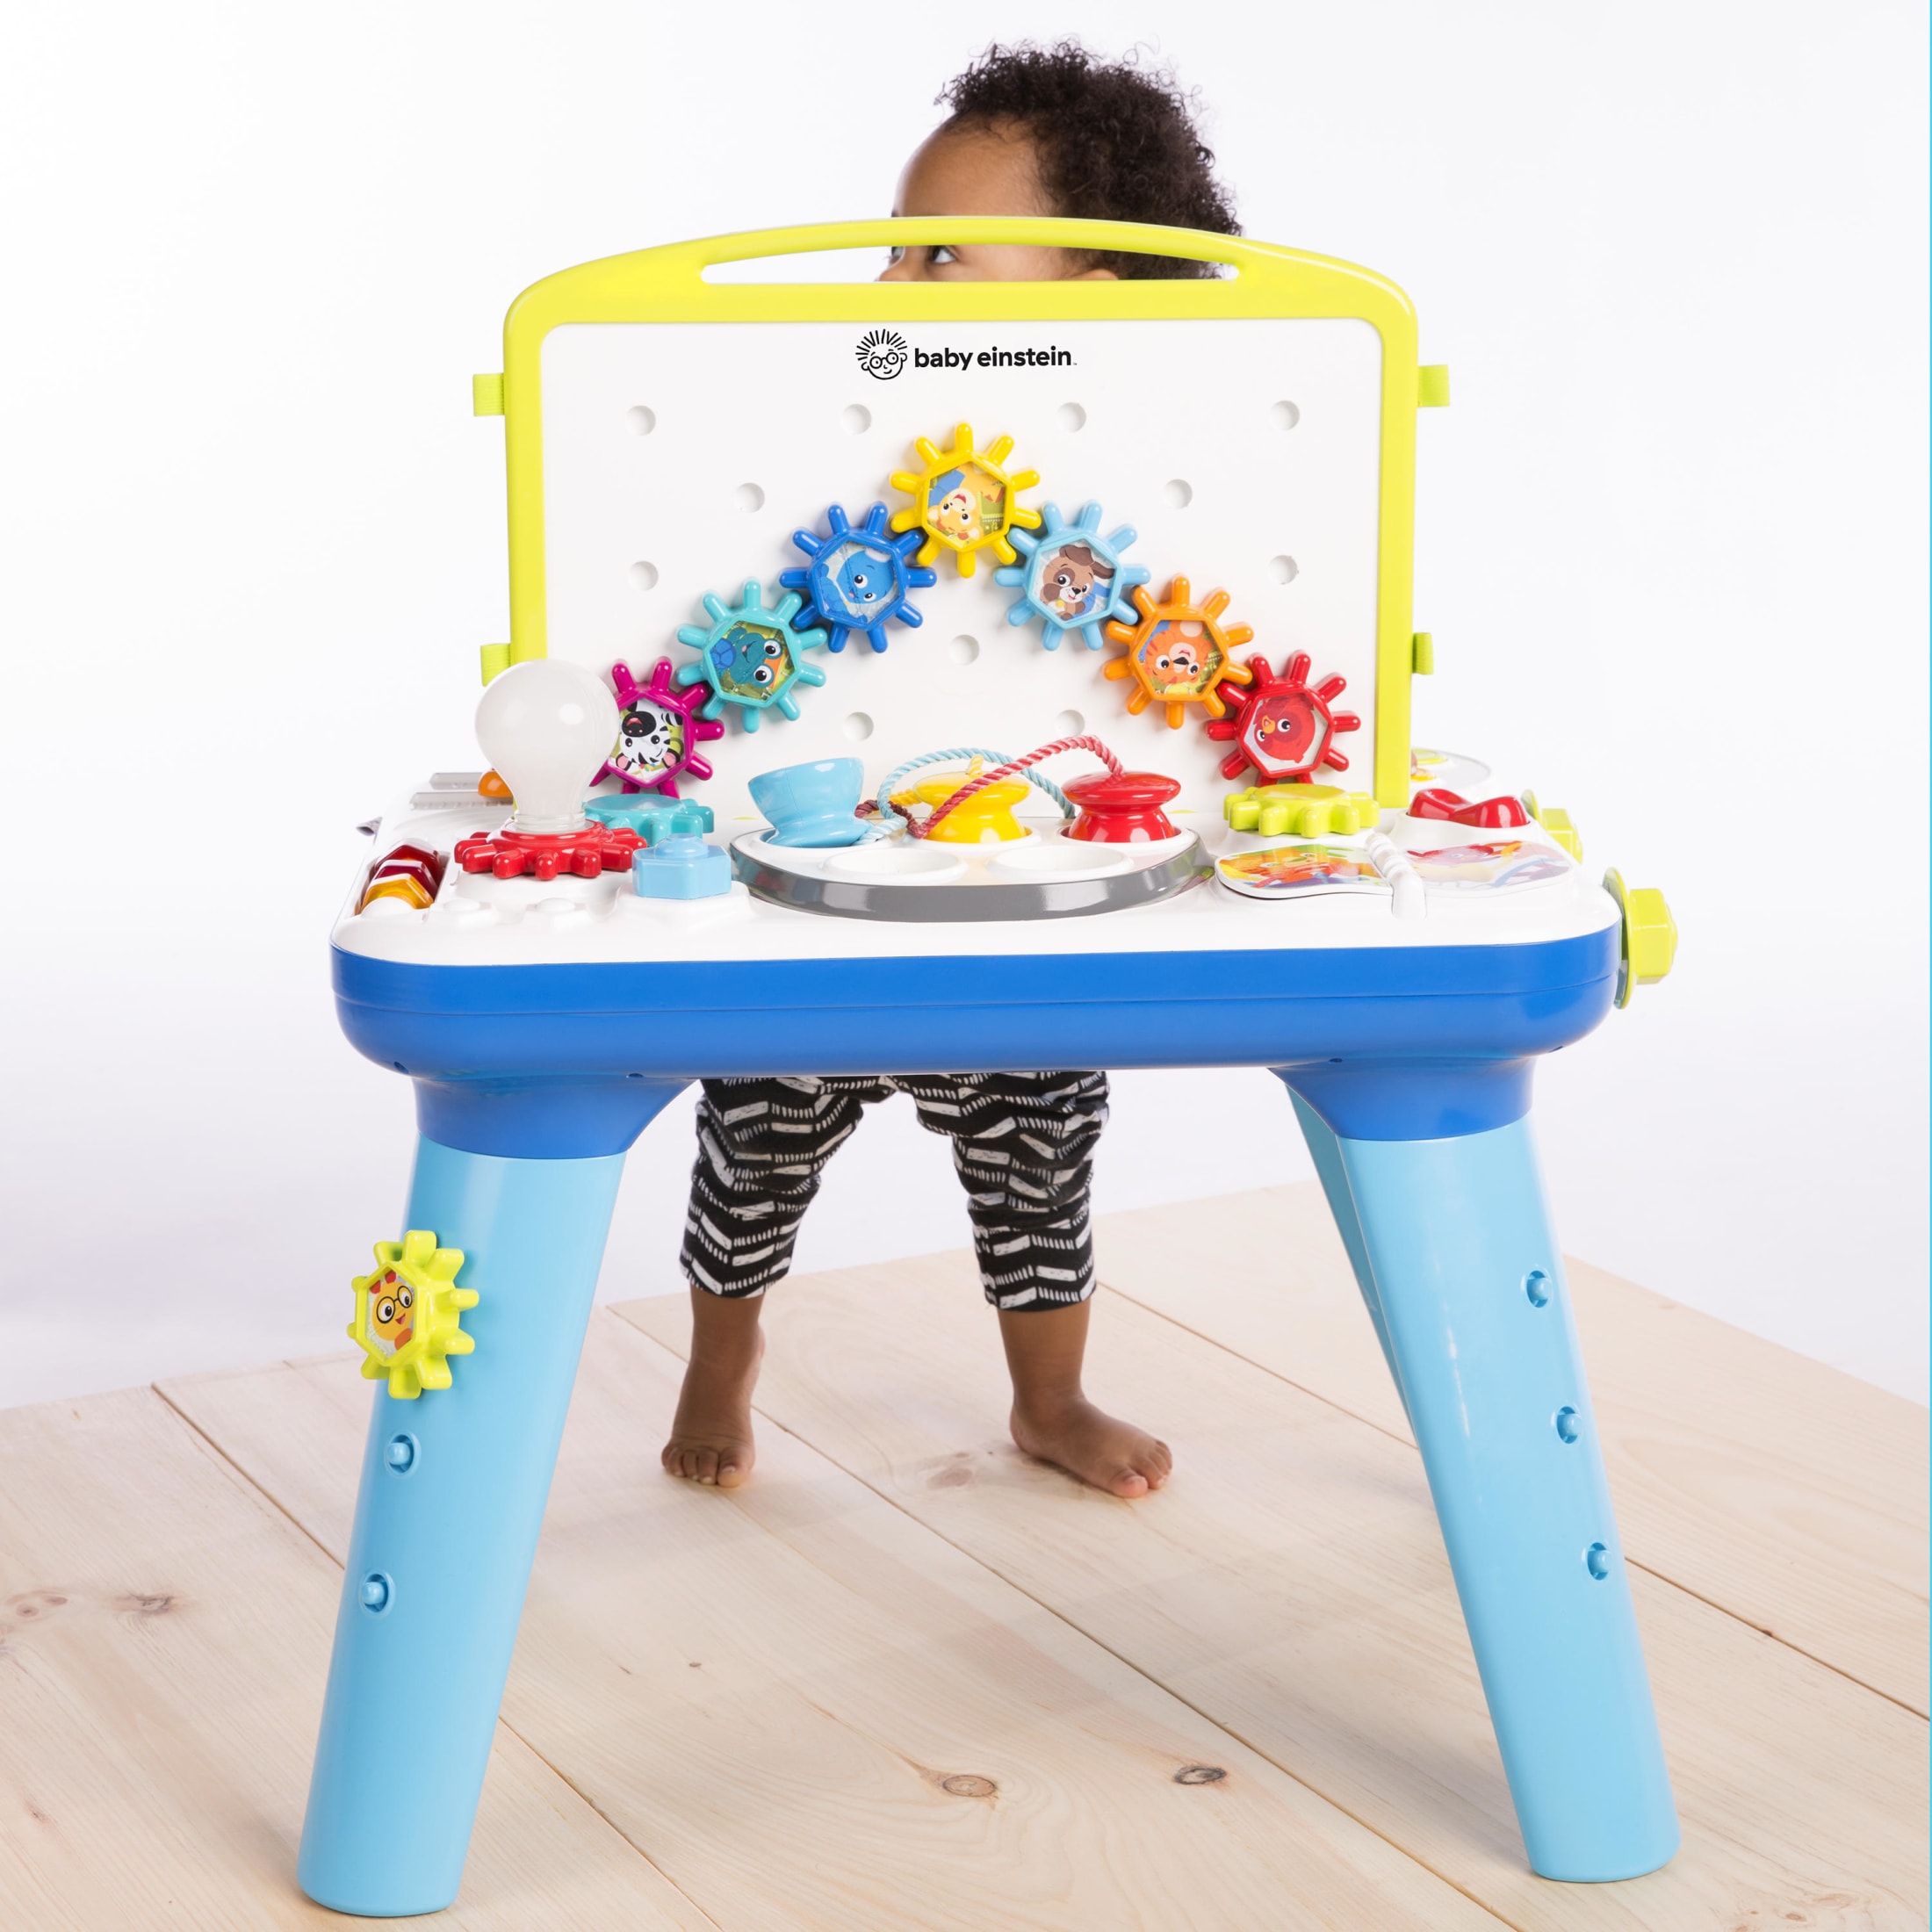 Baby Einstein Removable Curiosity Table Unisex Toddler Activity Center - image 5 of 12